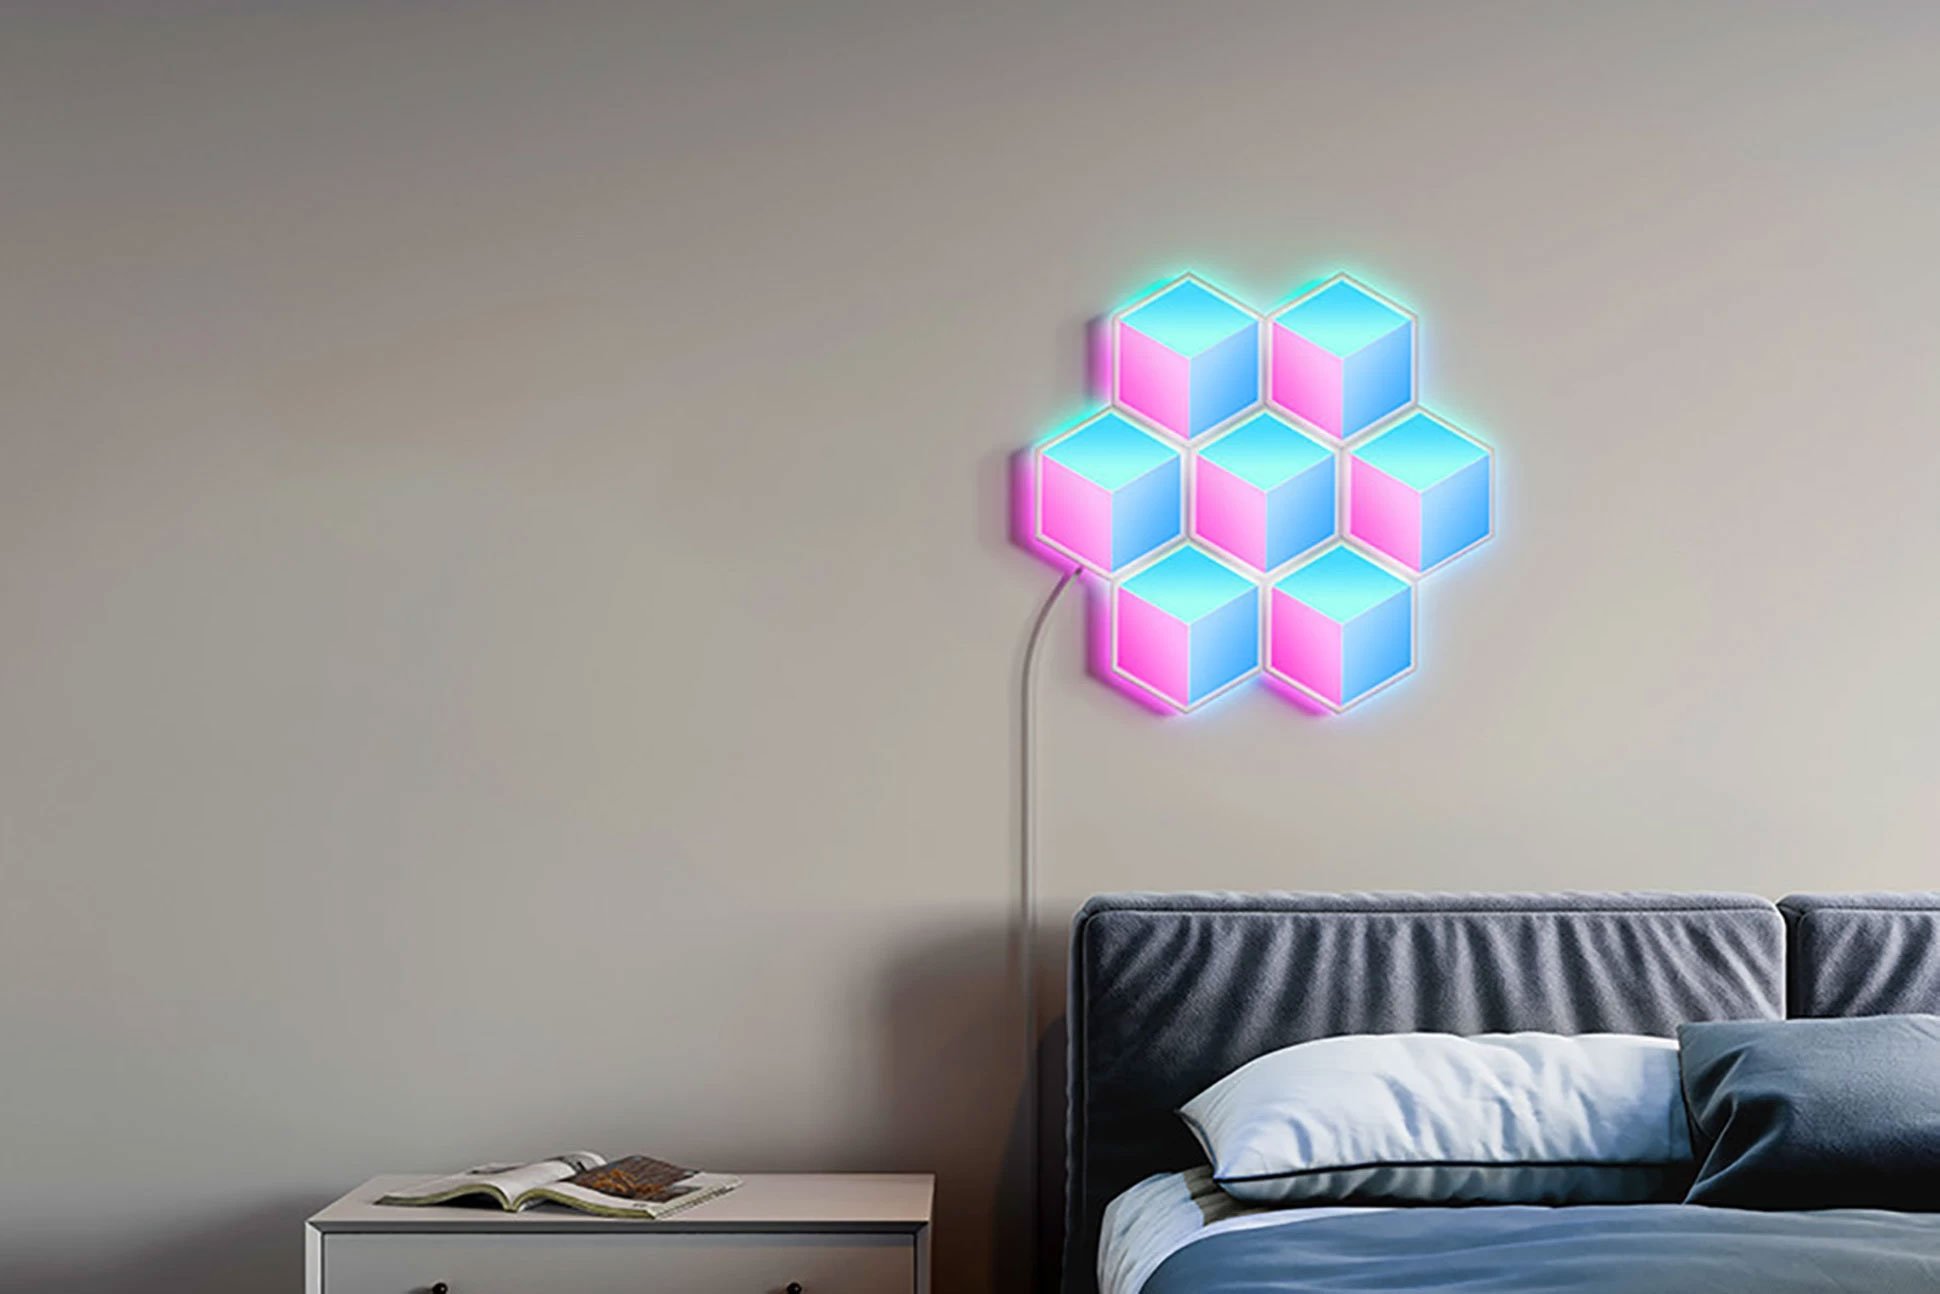 Govee gets into cubism with new light panels